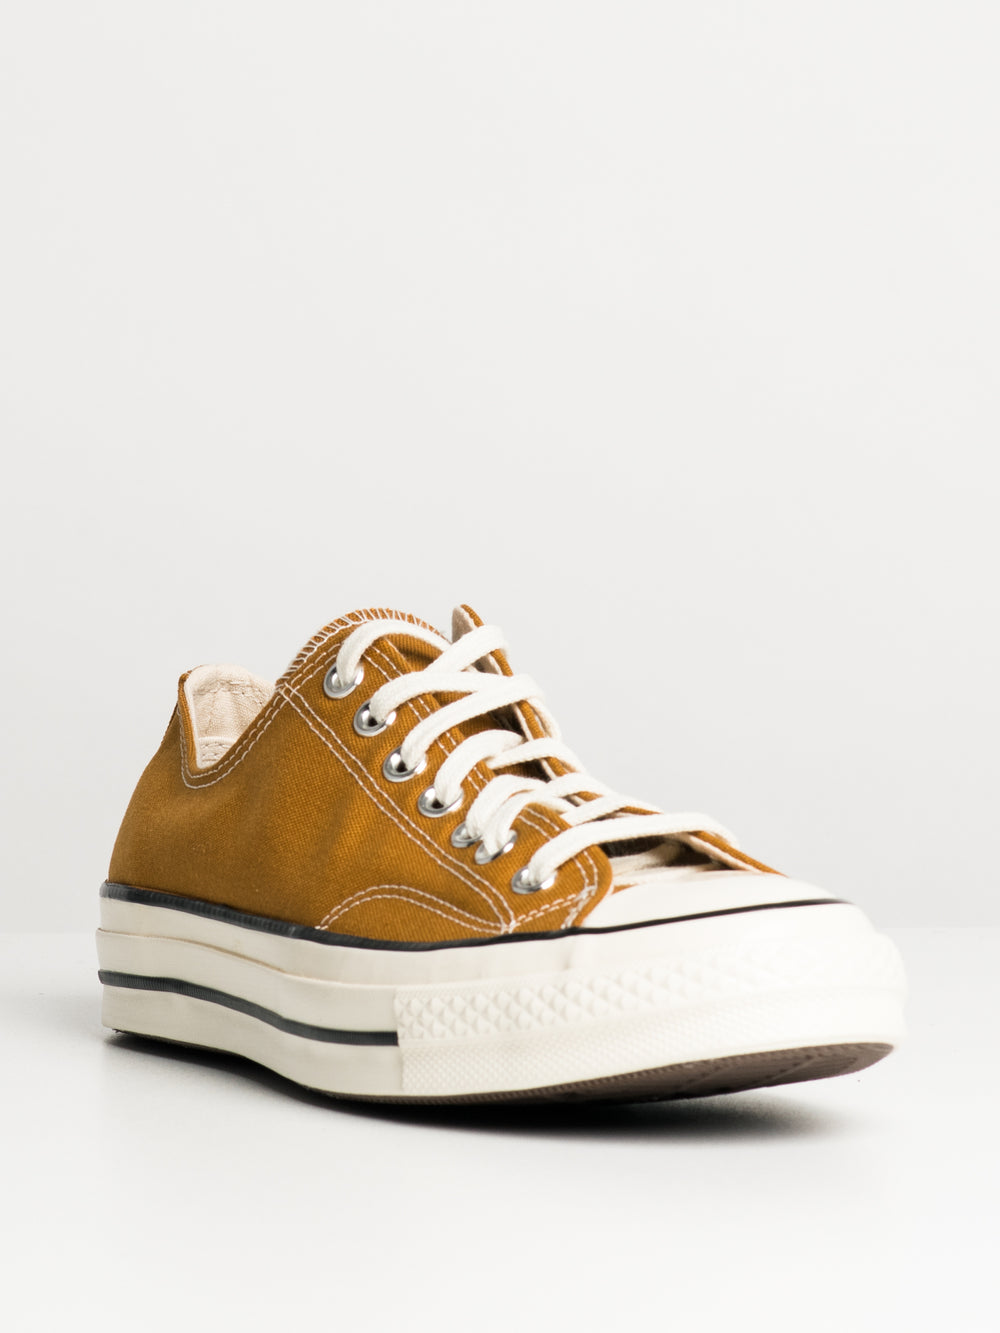 MENS CONVERSE CHUCK 70 RECYCLED CANVAS - CLEARANCE